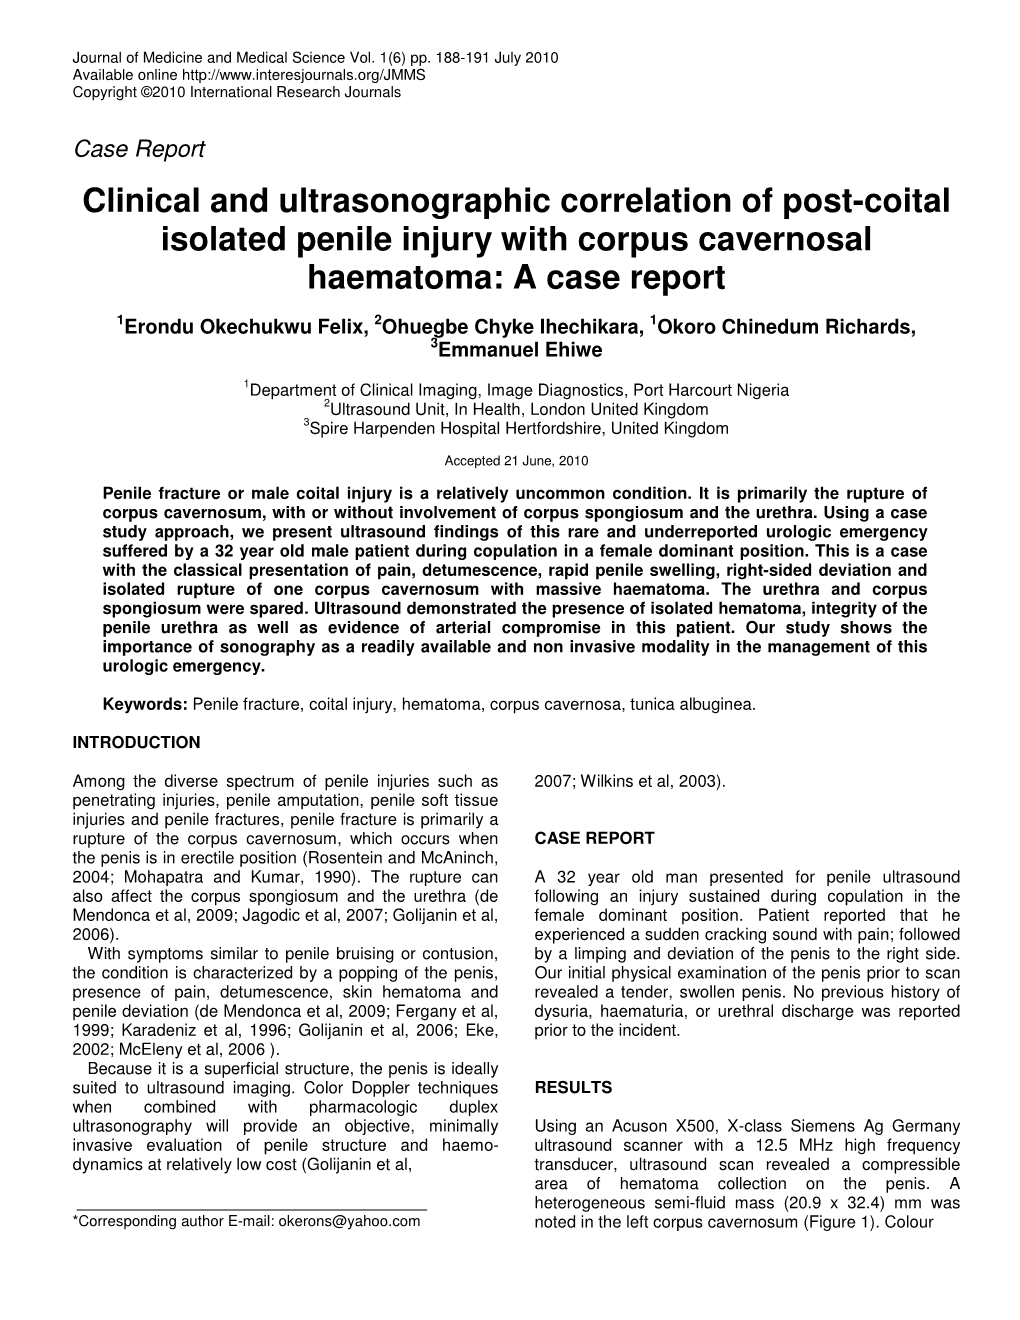 Clinical and Ultrasonographic Correlation of Post-Coital Isolated Penile Injury with Corpus Cavernosal Haematoma: a Case Report